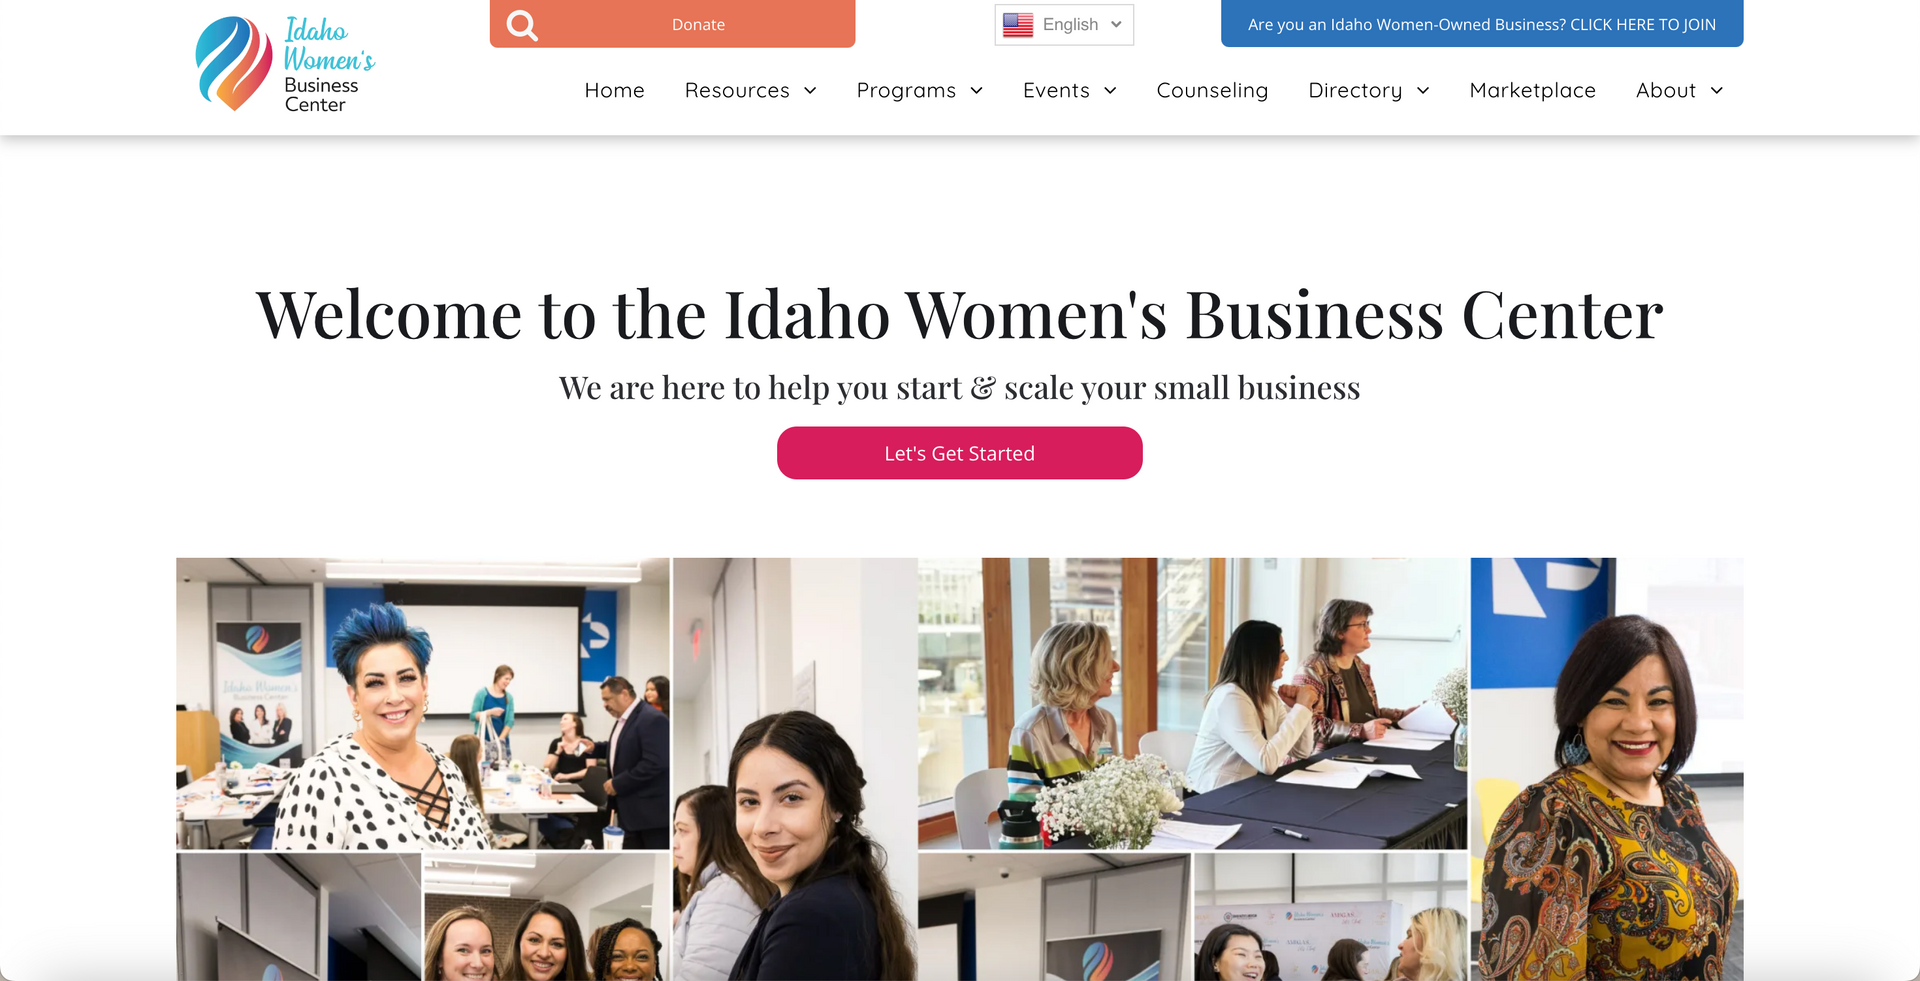 Pippily women's business center website example